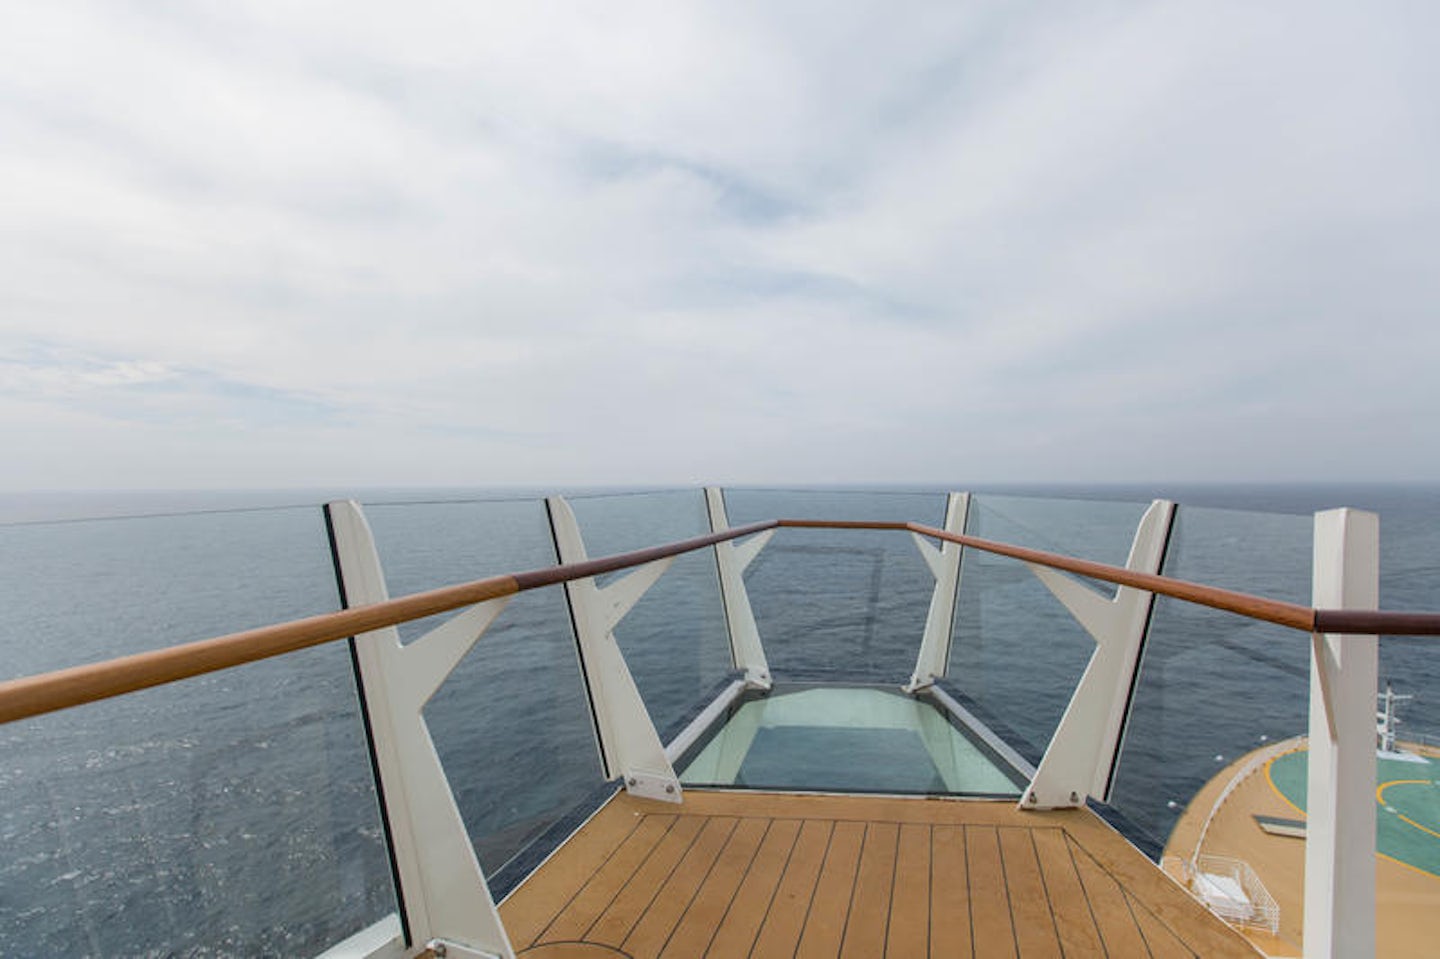 King of The World on Harmony of the Seas